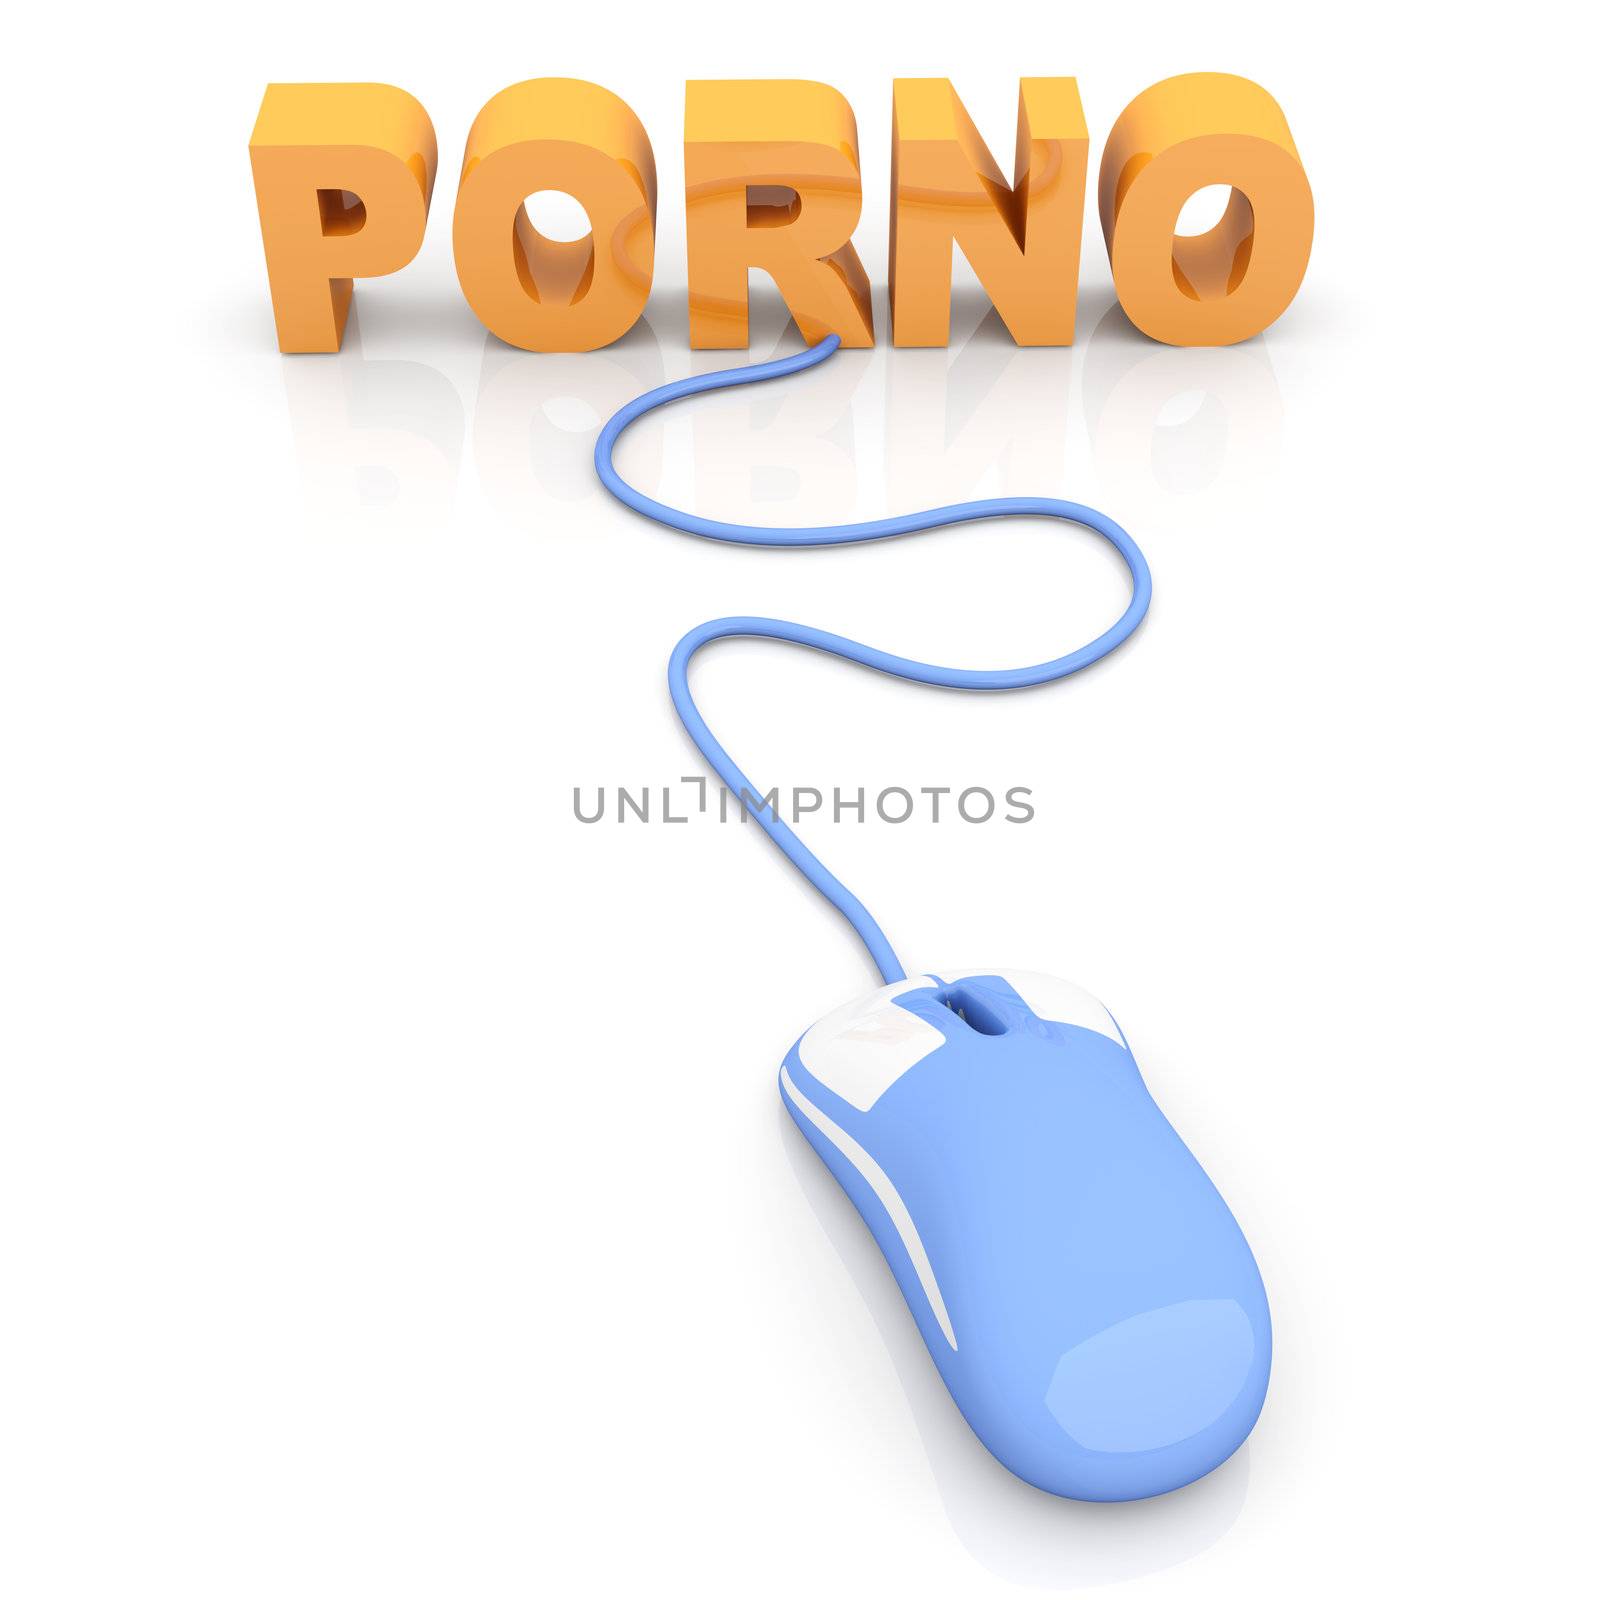 Porno click. 3D rendered Illustration. Isolated on white.